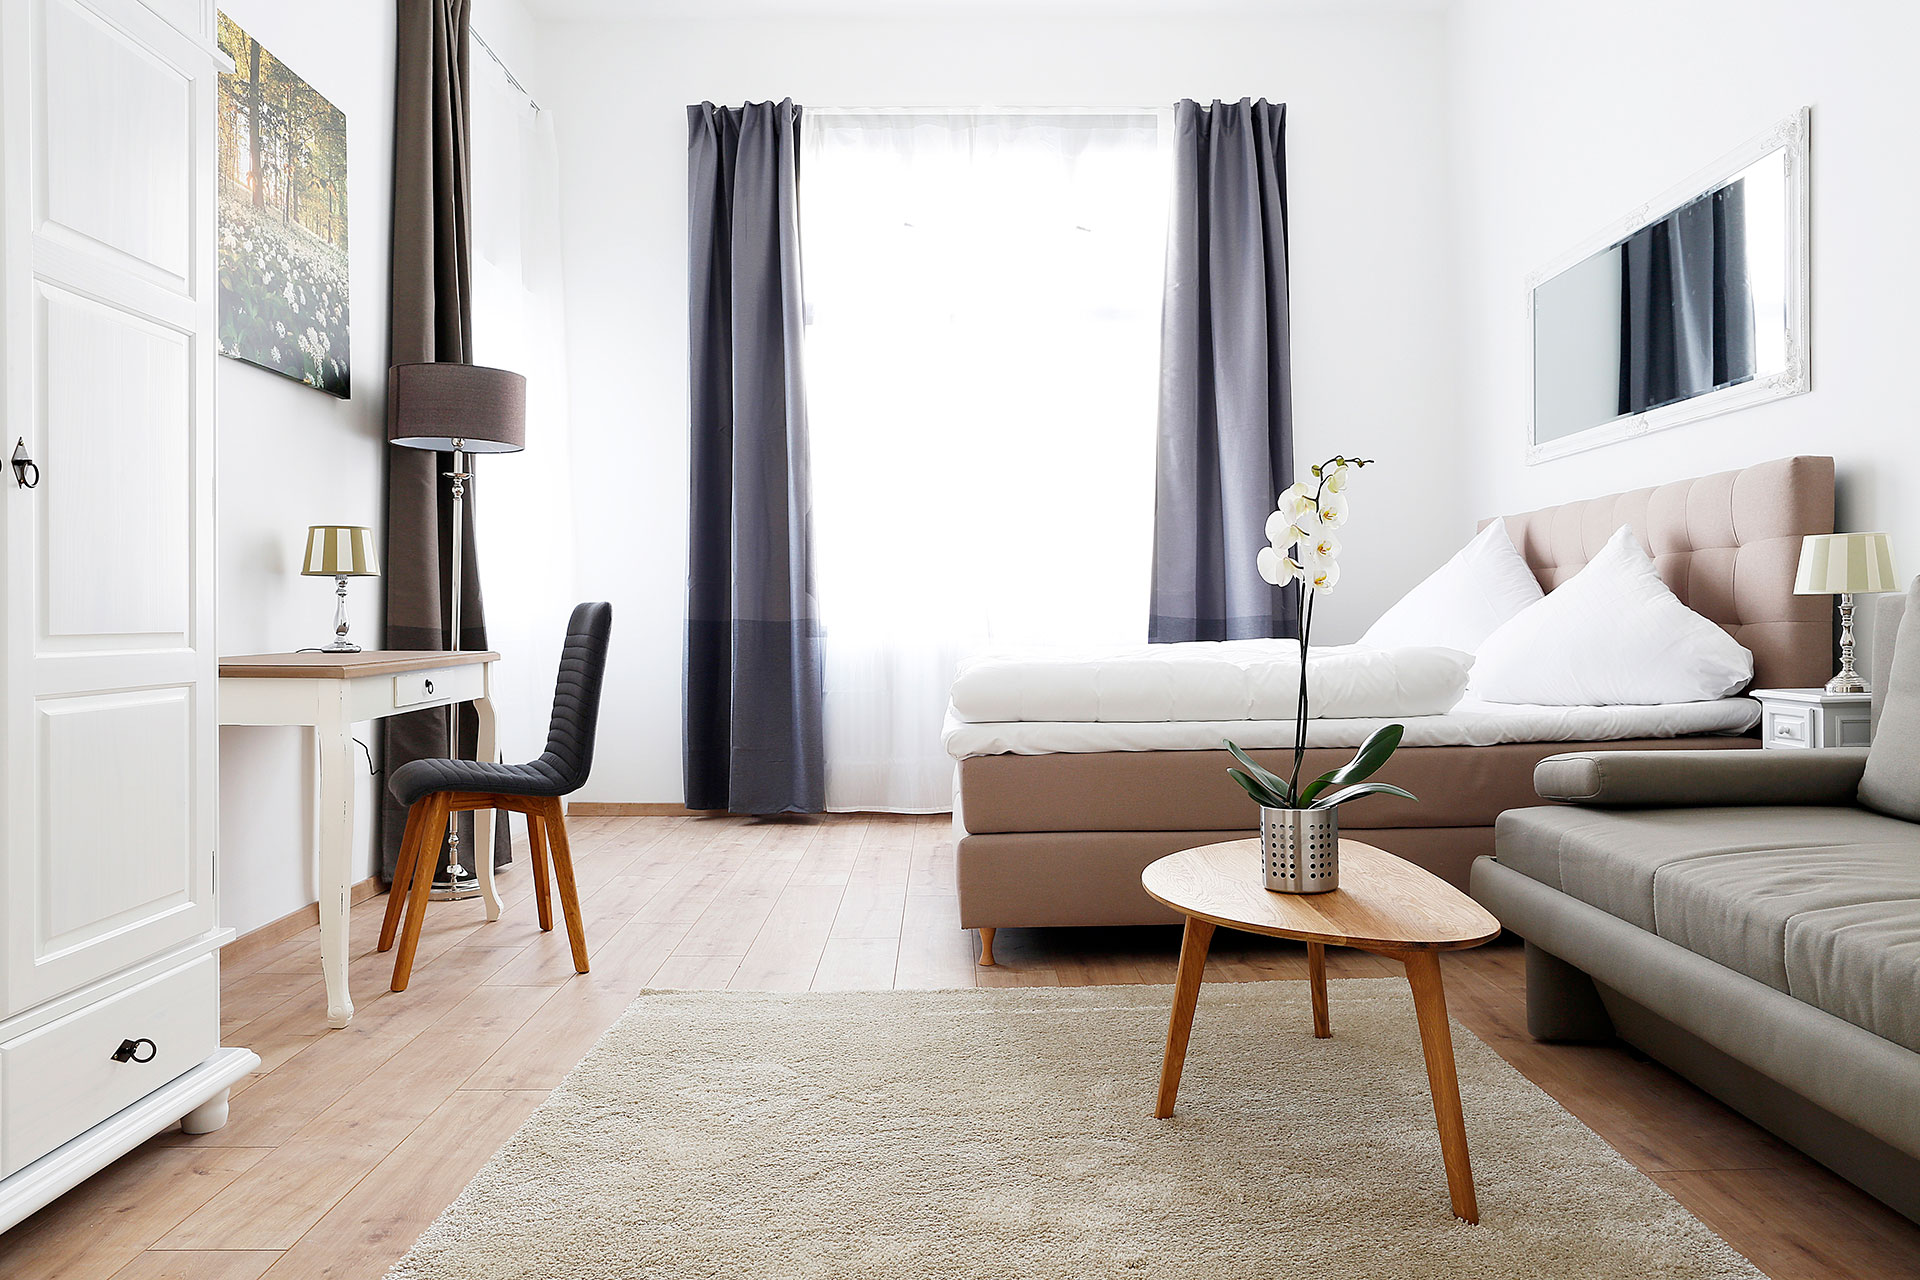 How to find an apartment in Berlin - All About Berlin